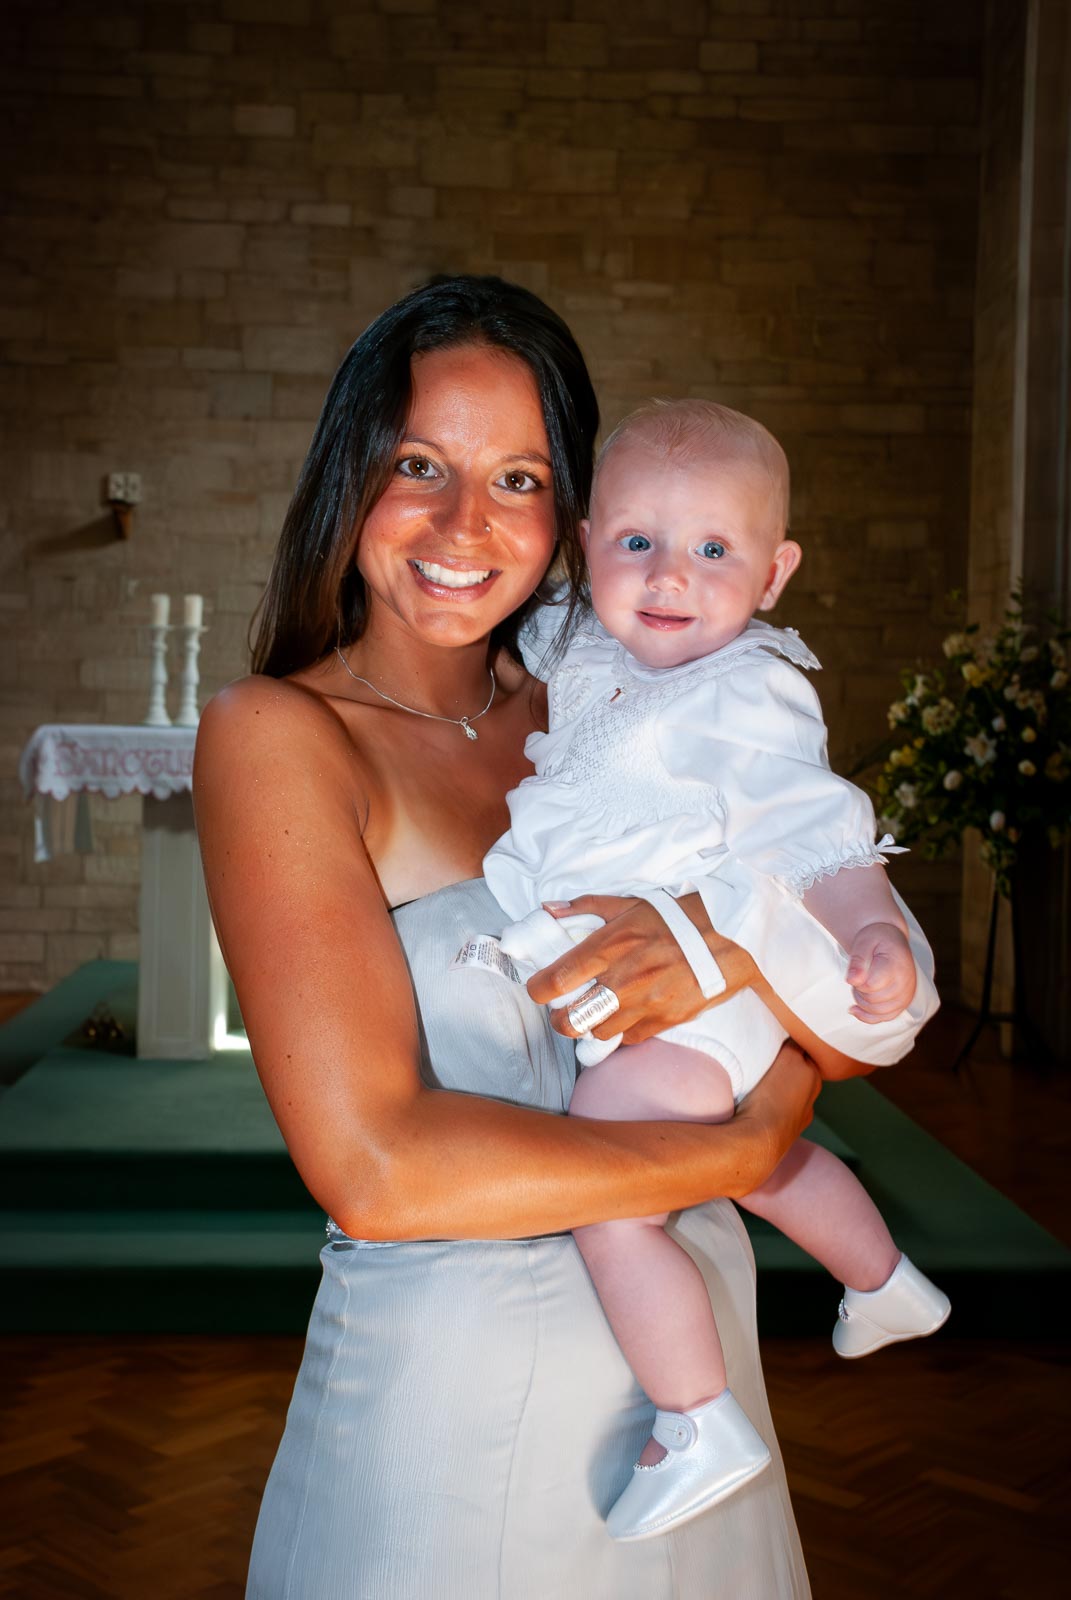 Amalie and her mum pose in the church after her baptism.